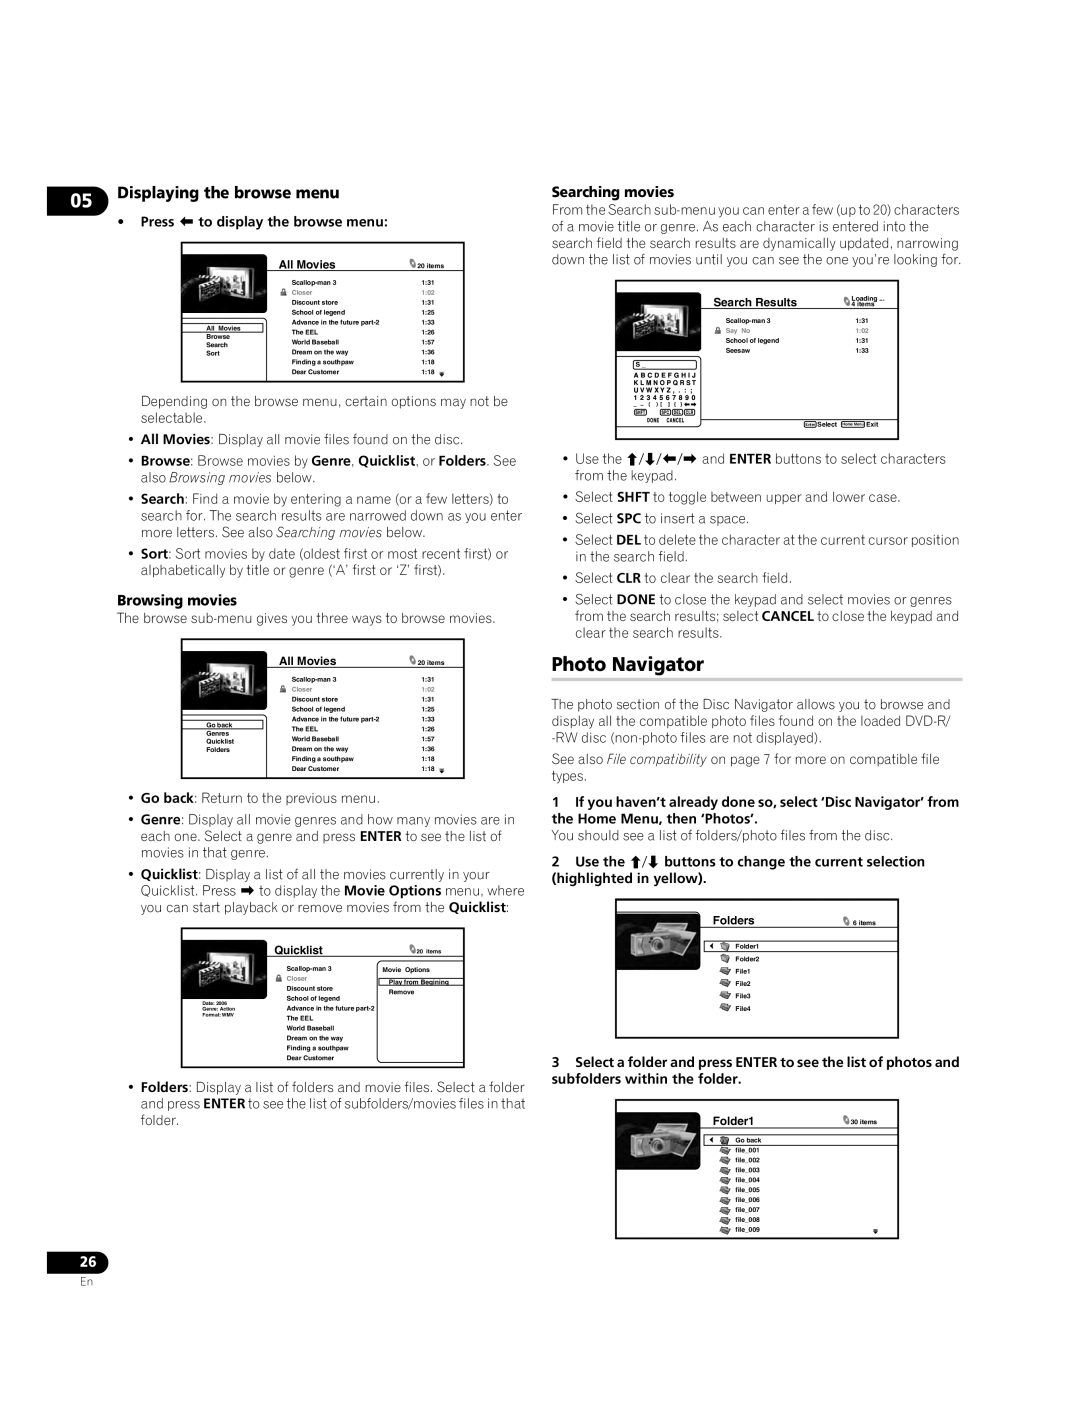 Pioneer BDP-LX70A operating instructions Photo Navigator, Displaying the browse menu 